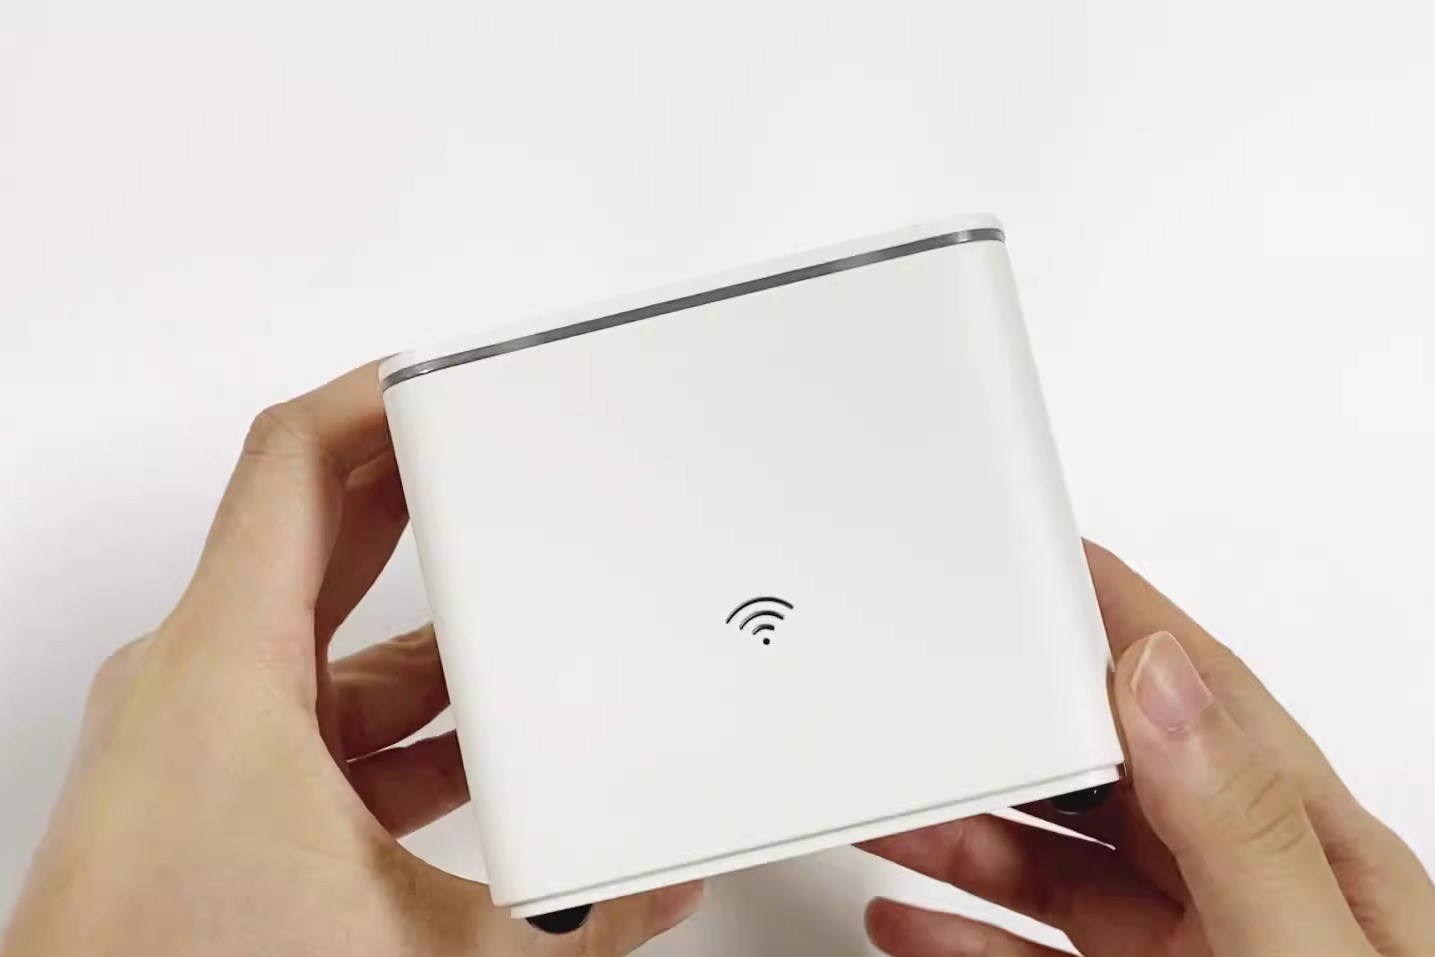 connecting-sim-card-to-wifi-router-step-by-step-guide